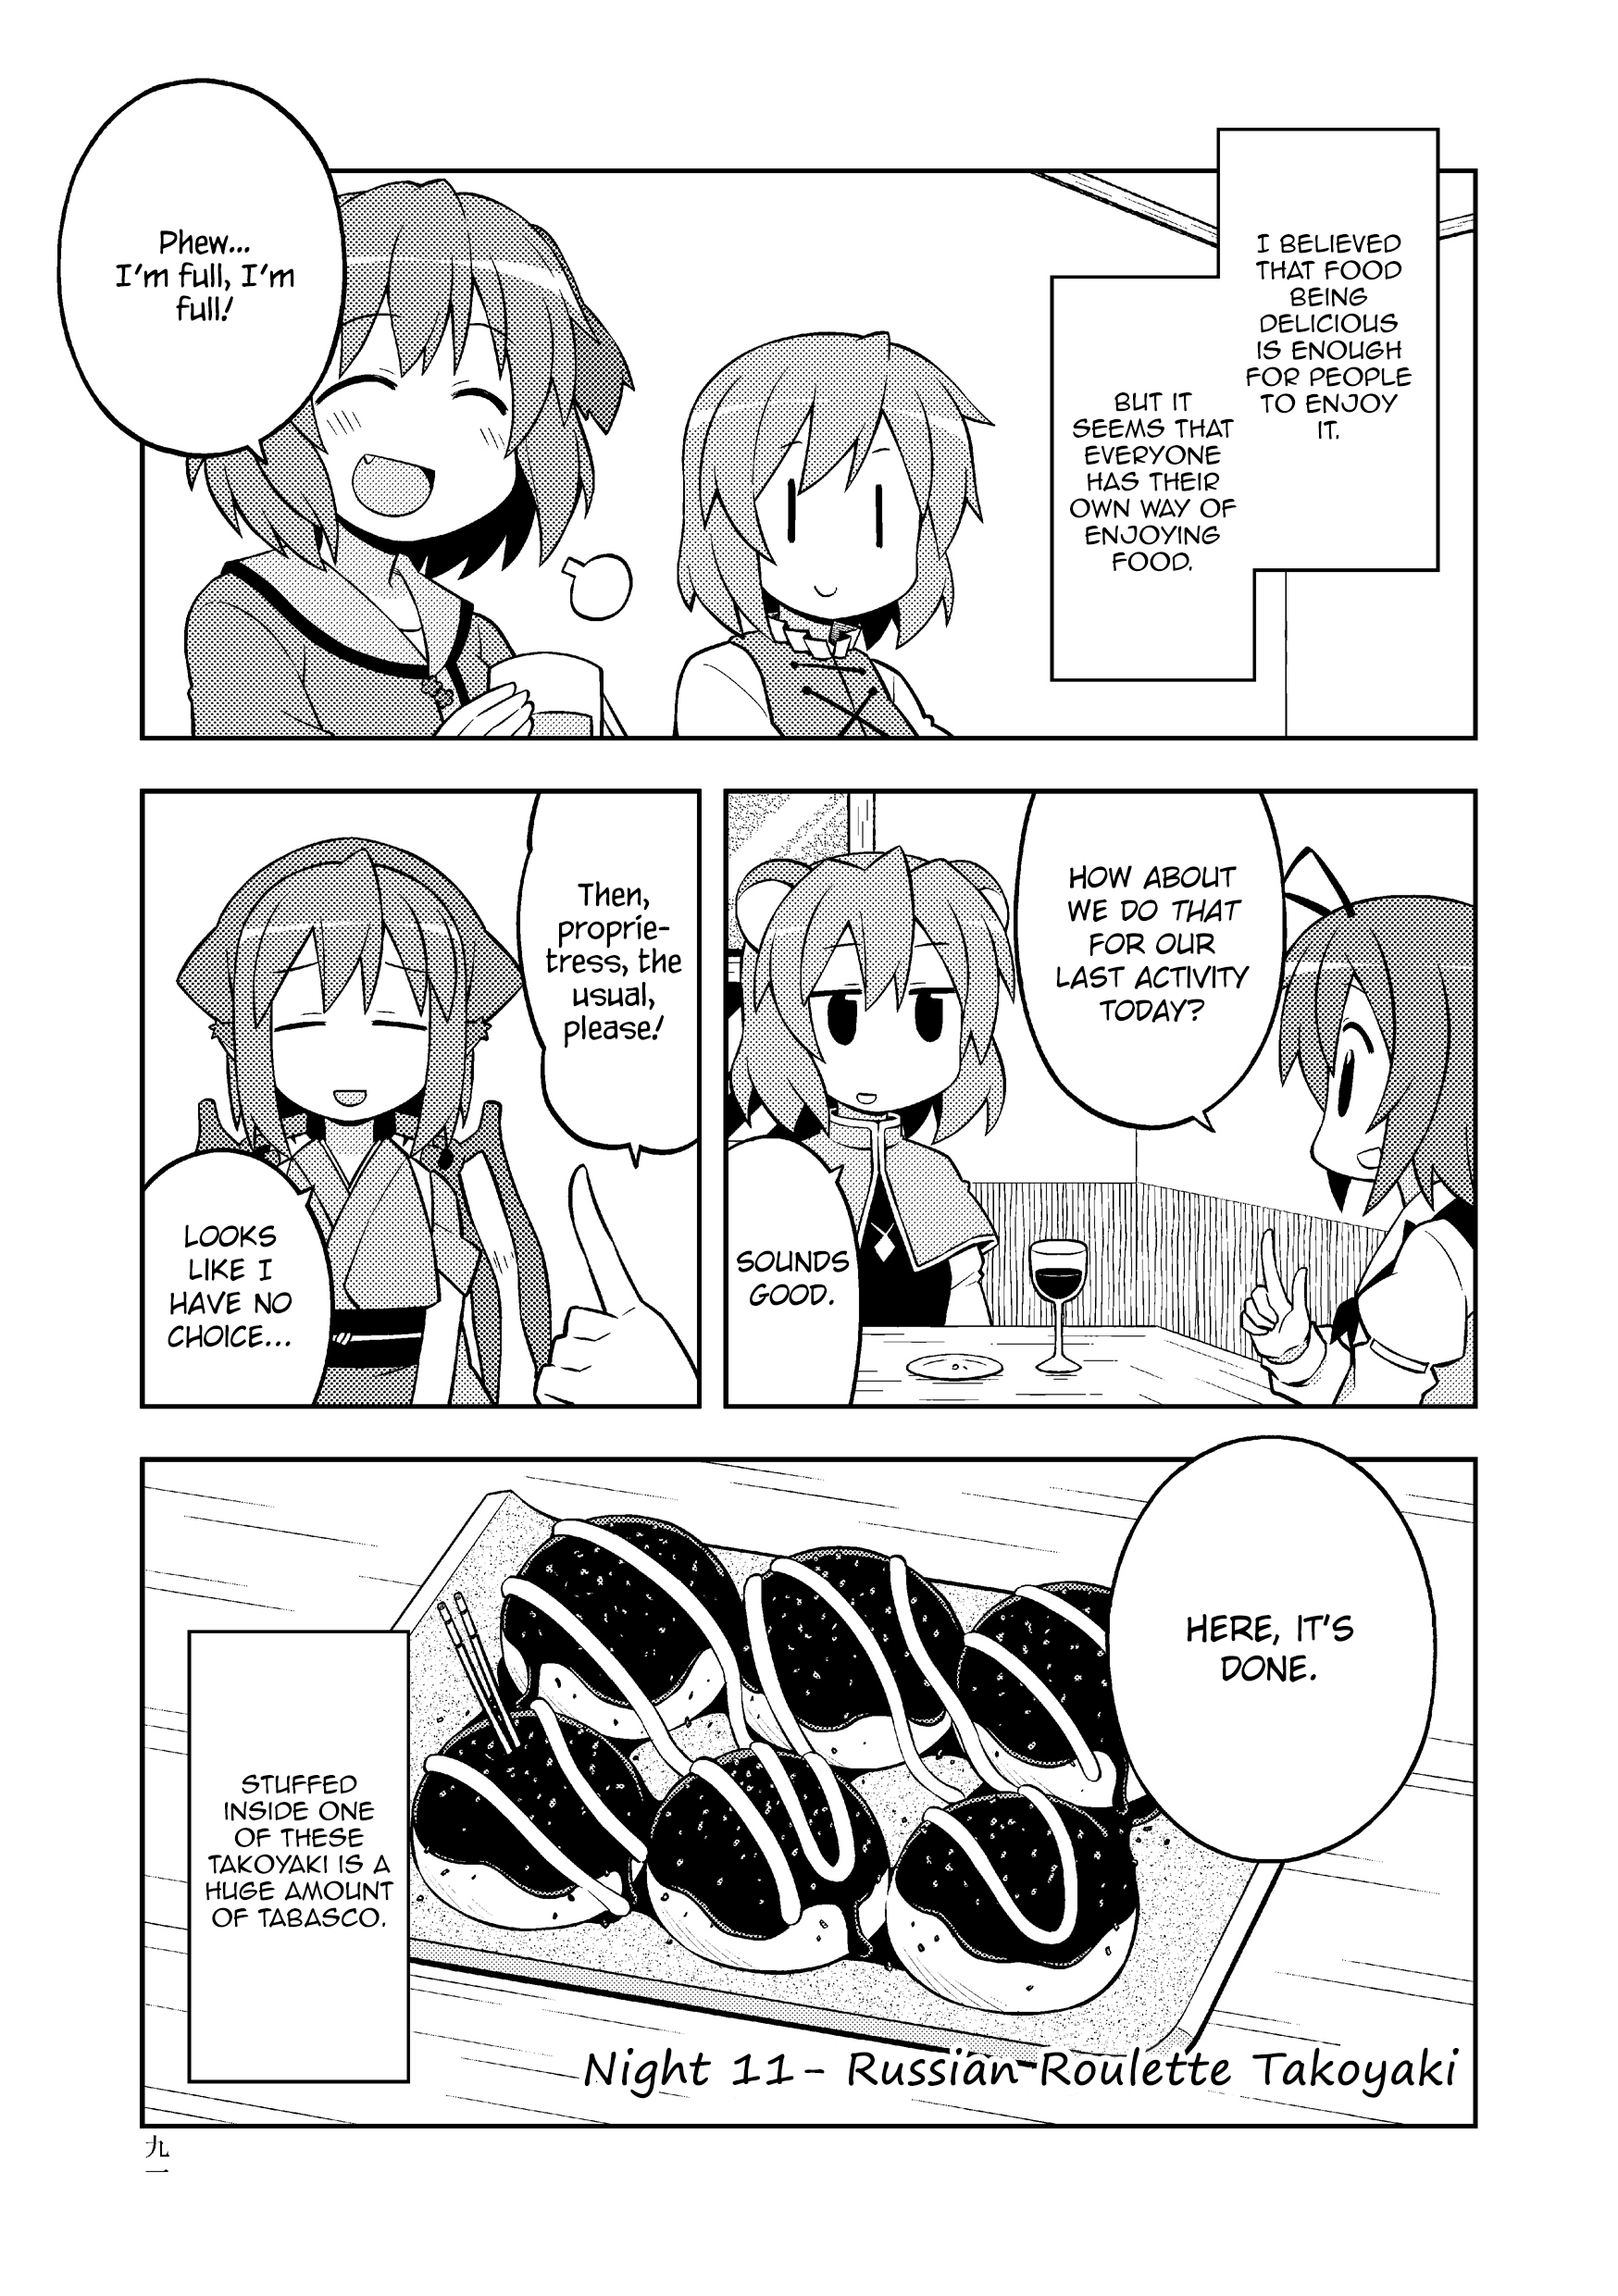 Touhou - The Sparrow's Midnight Dining (Doujinshi) Vol.4 Chapter 11: Night 11 - Russian Roulette Takoyaki - Picture 1